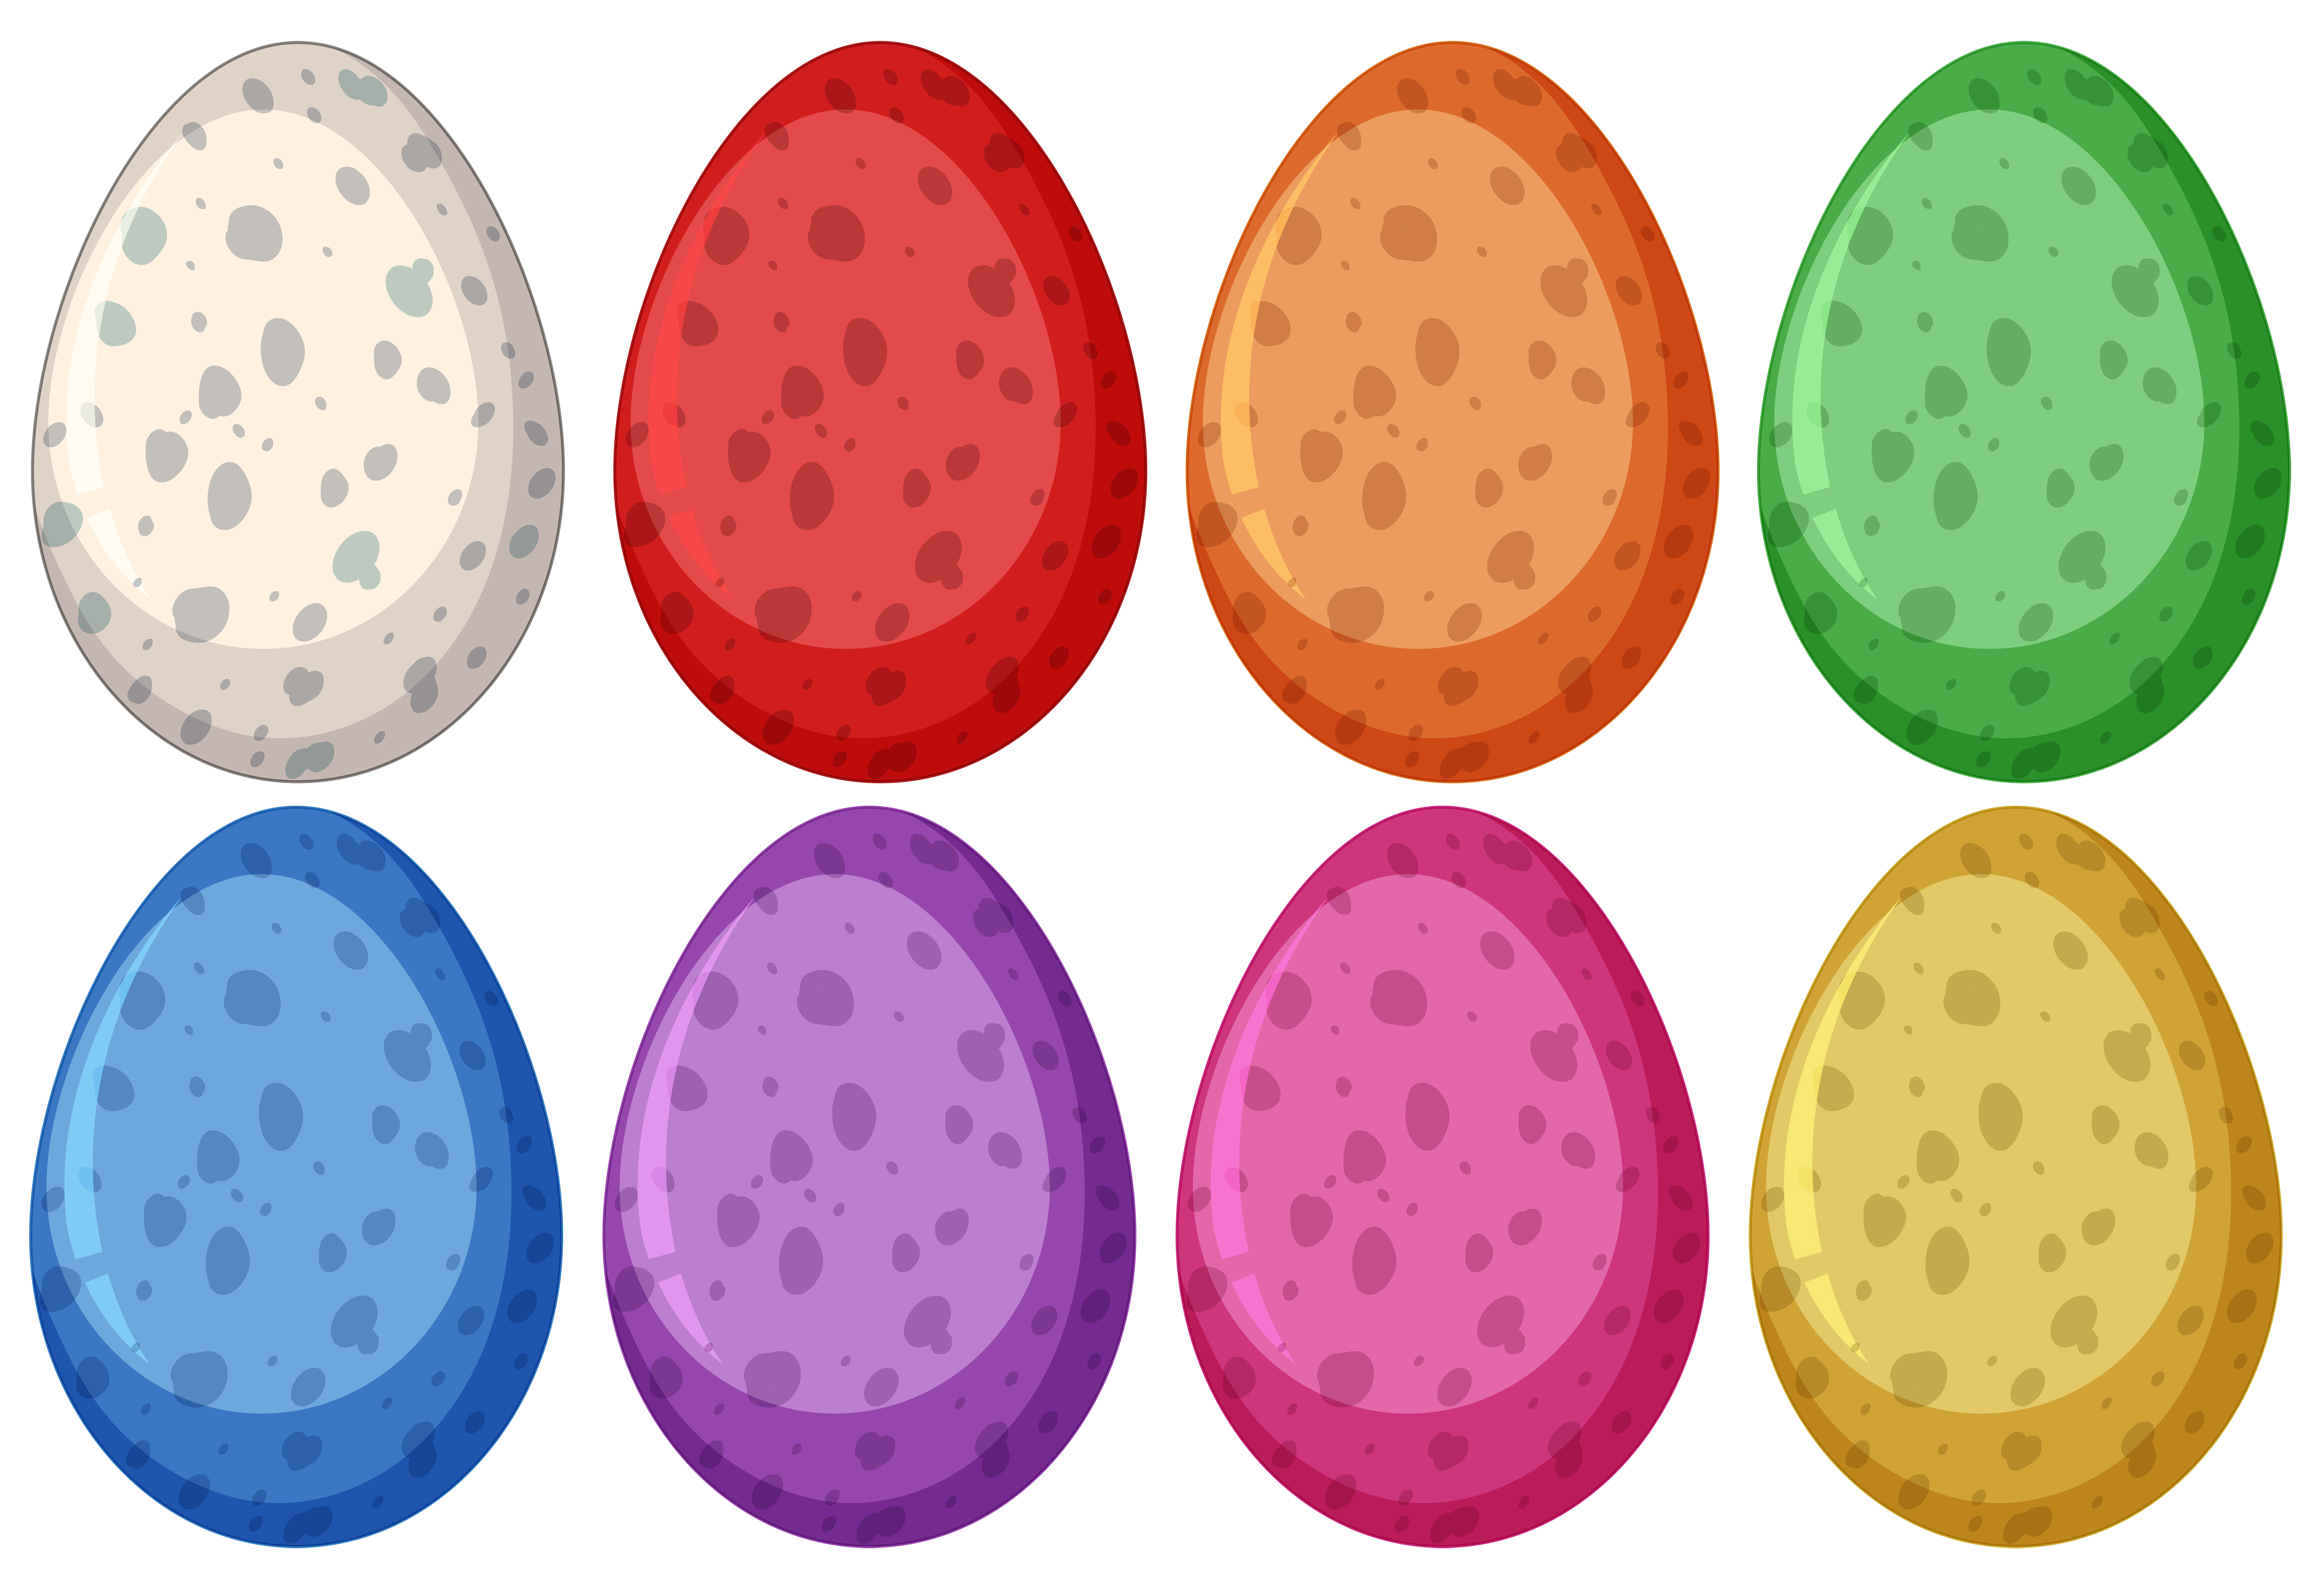 Browse 438 incredible Dino Egg vectors, icons, clipart graphics, and backgr...